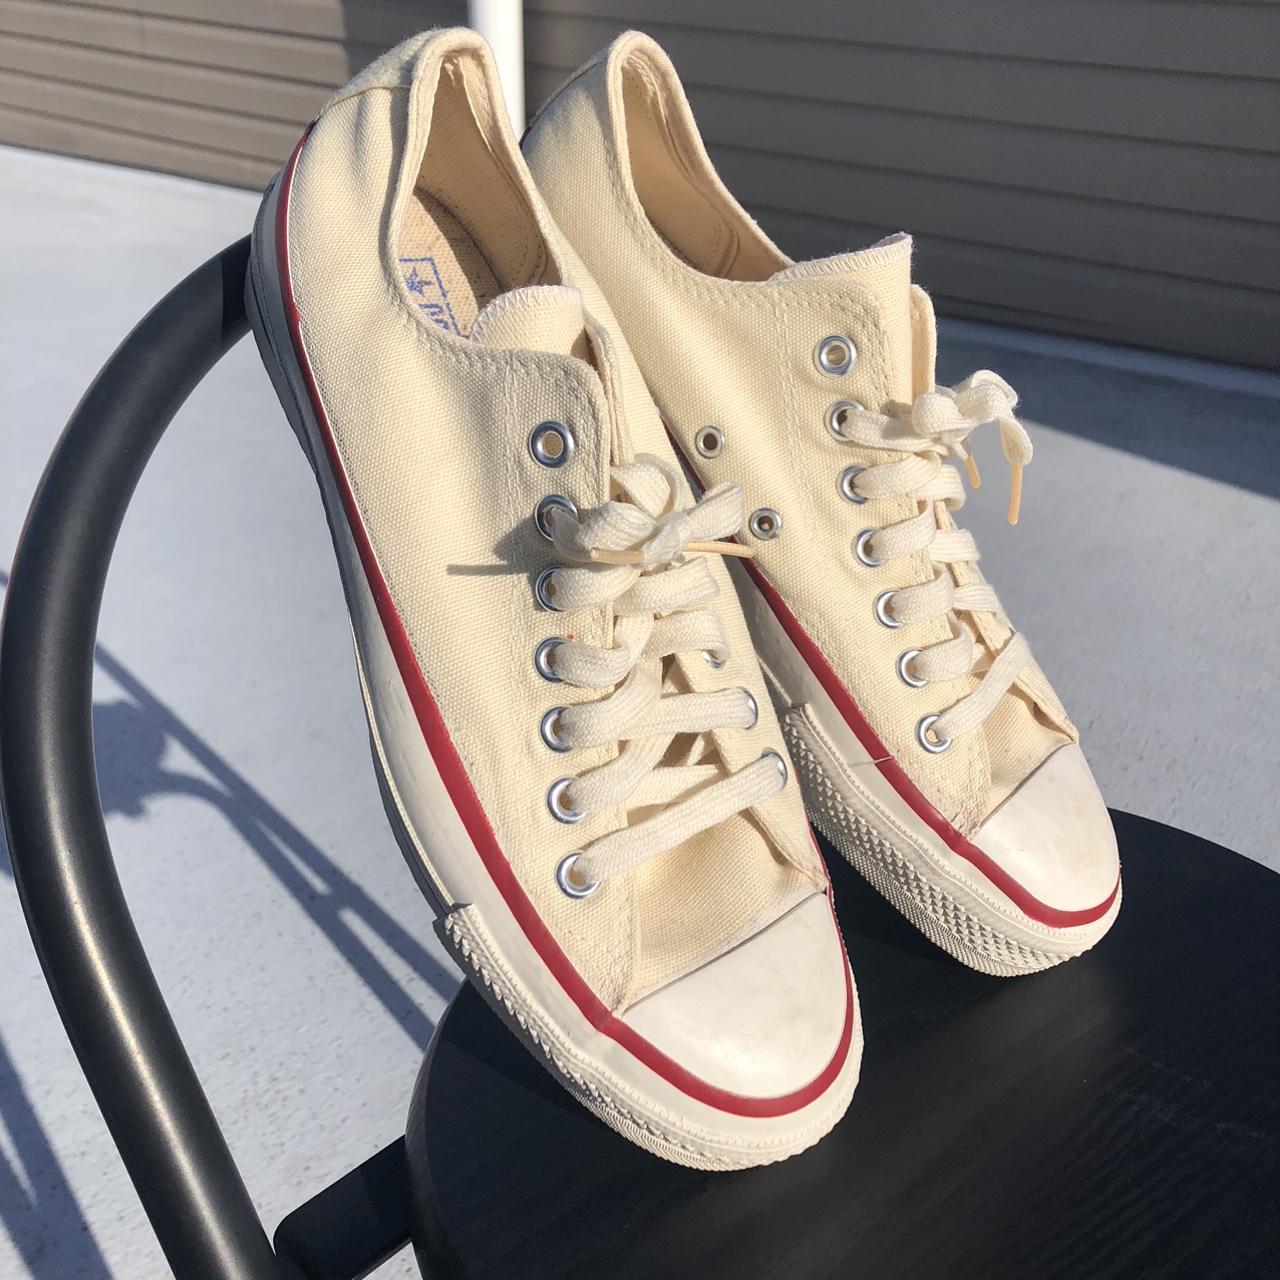 Vintage Converse Chuck Taylor 70s Rare to see in... - Depop